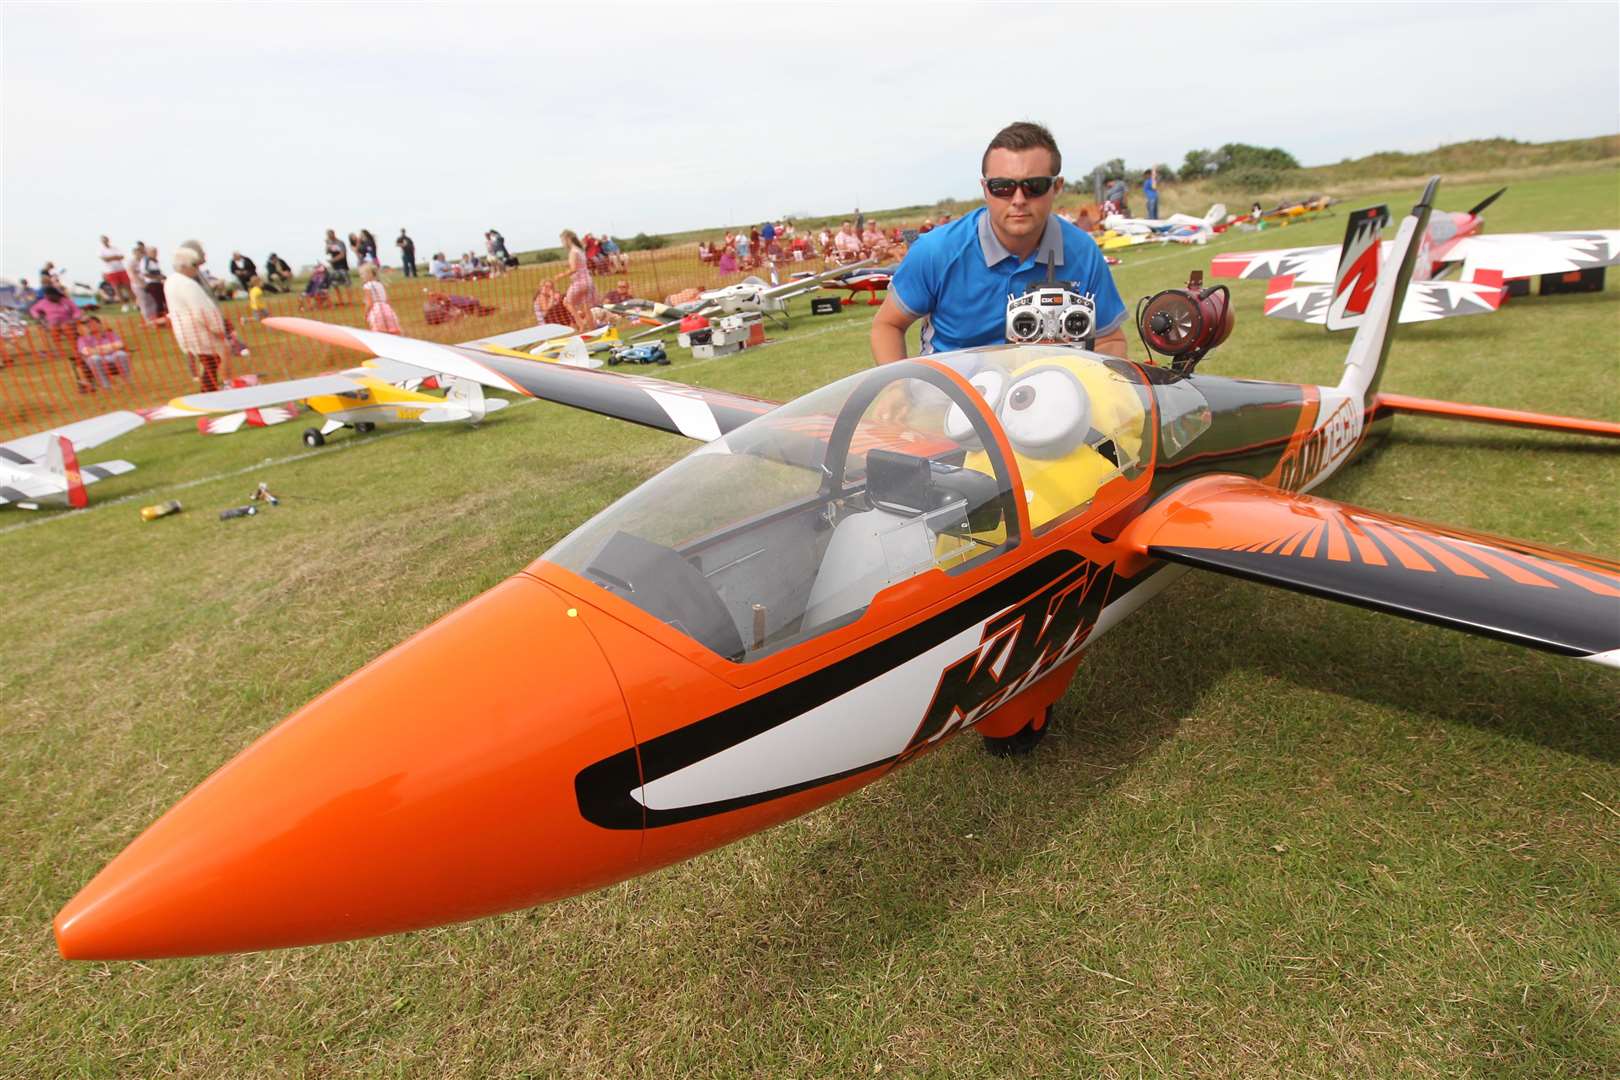 Azza Stephens, from Canvey Island who came third in the World with his Jet free Style with his £15,000 half scale Fox Glider model at a Model Flying Club Spectacular held at Barton's Point. Picture By: John Westhrop FM4418280 (2343129)